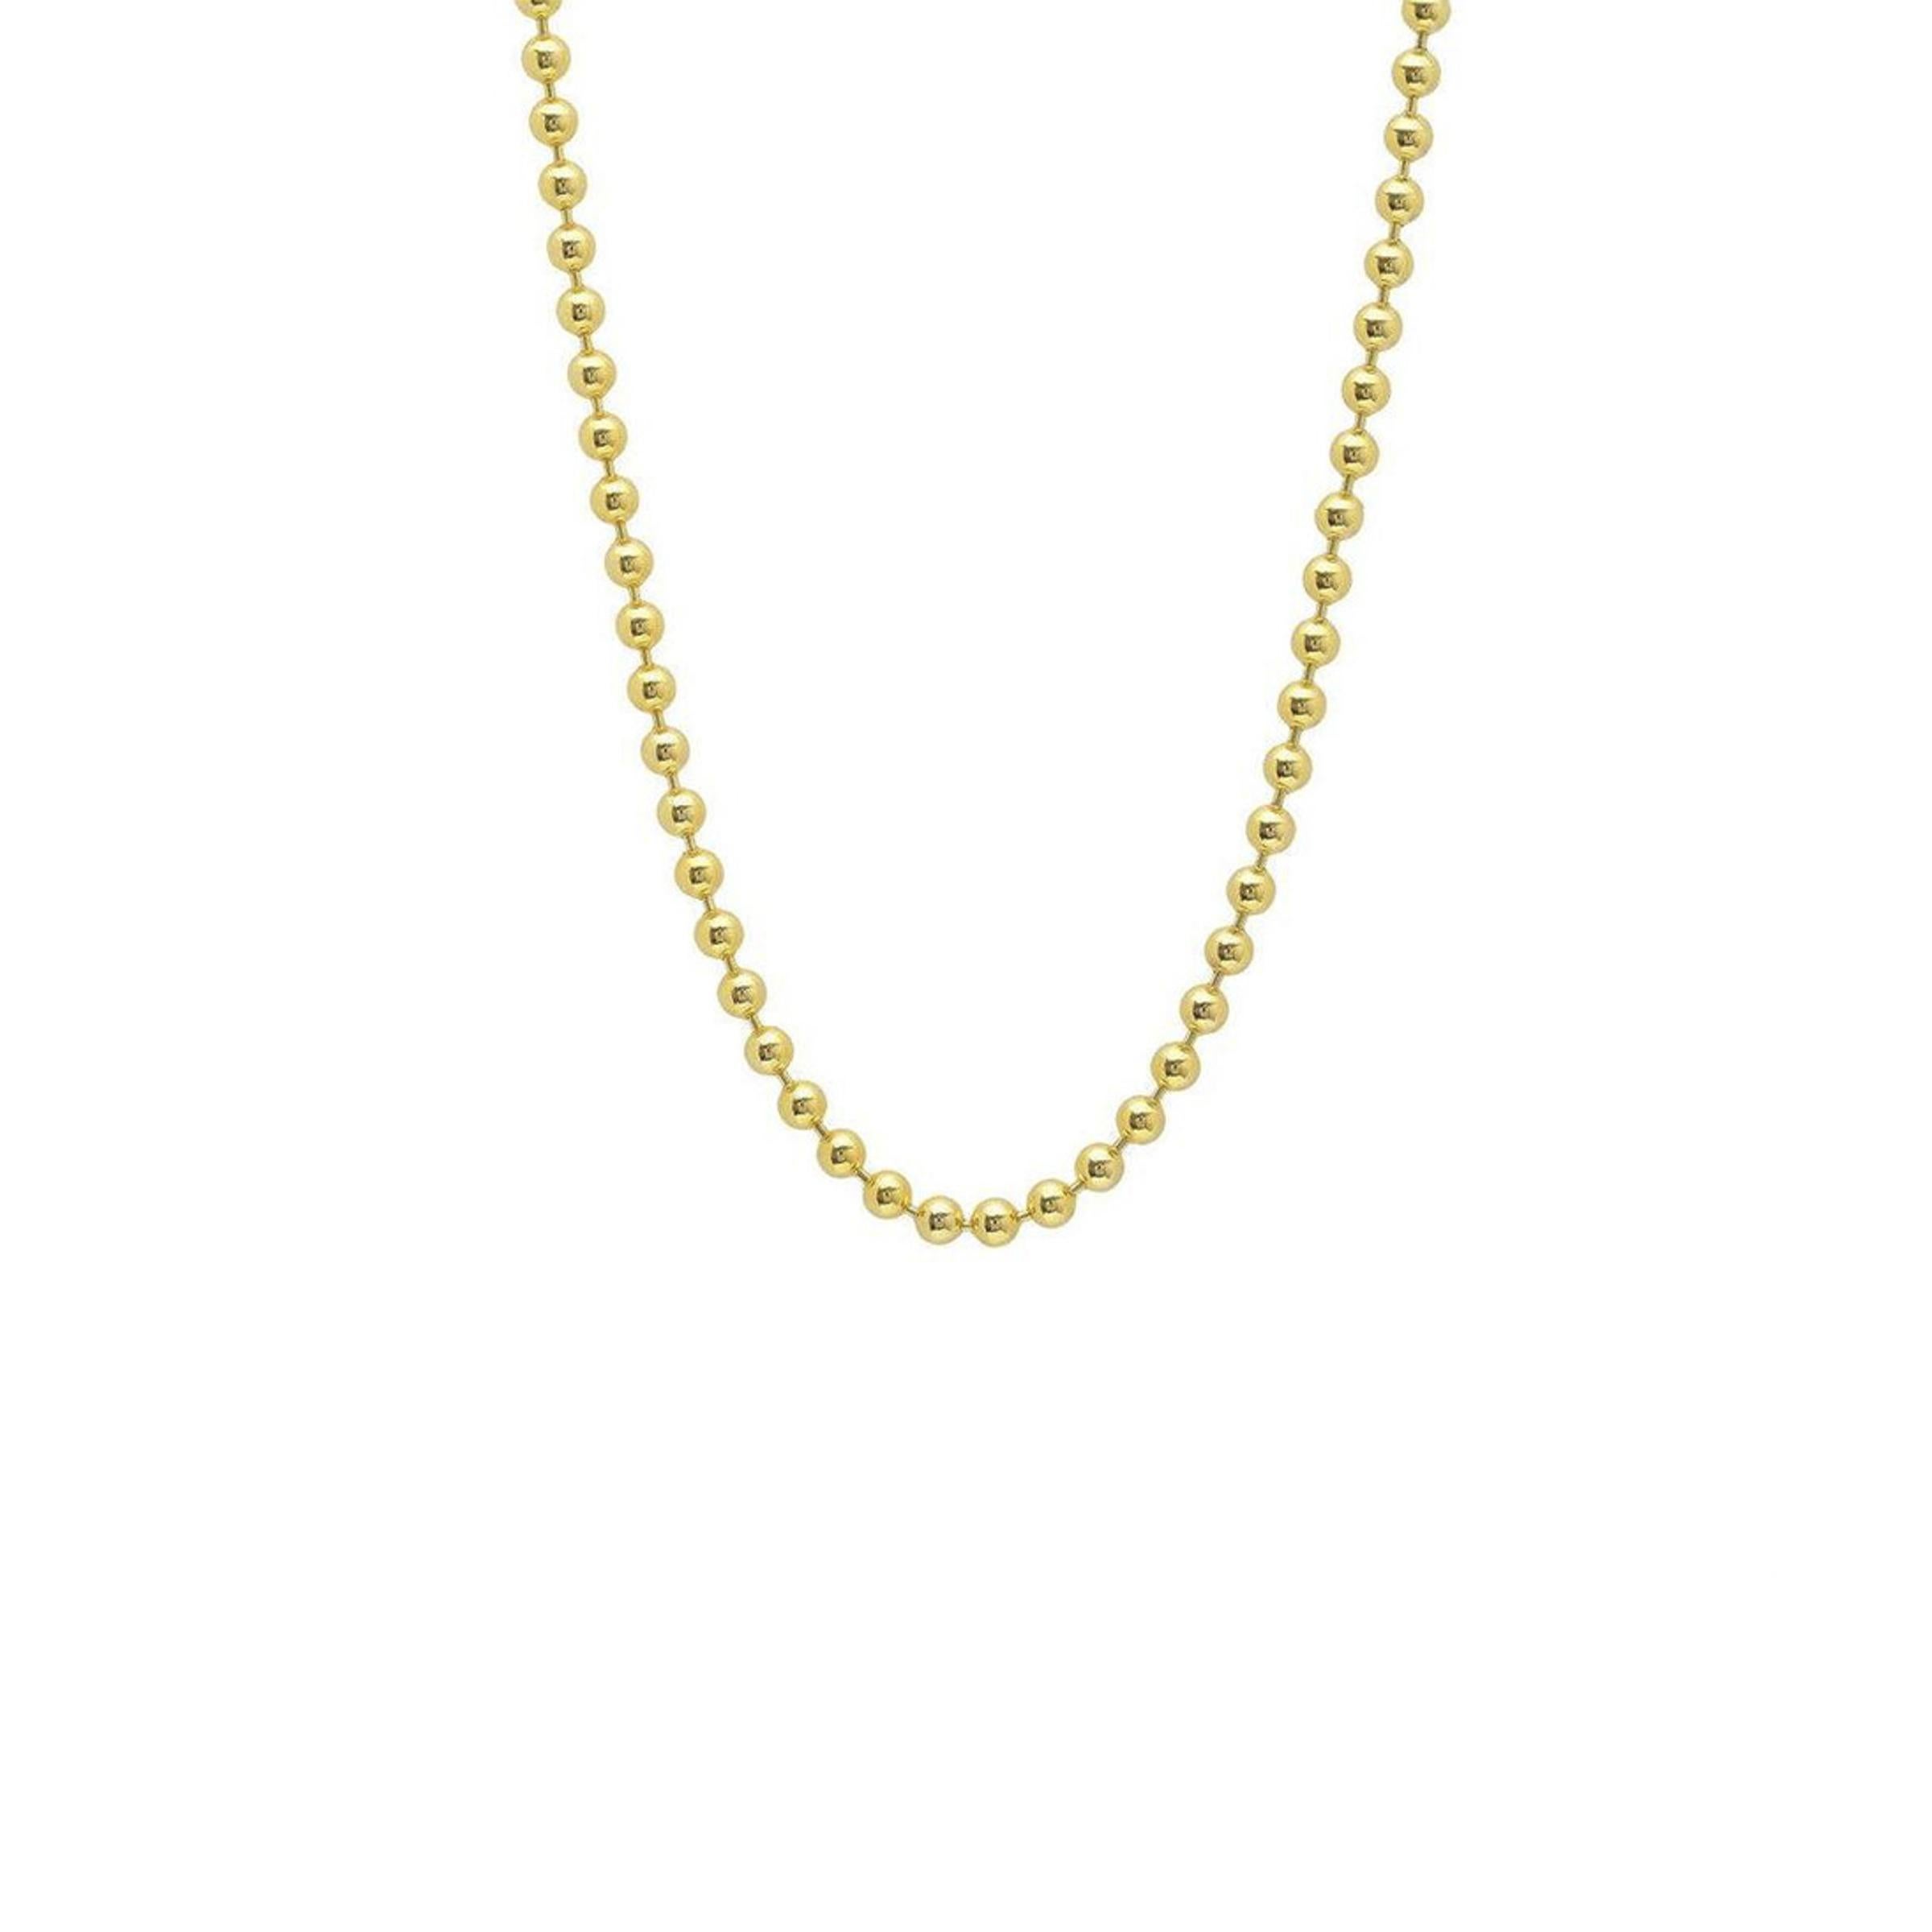 Gold Smiley Face Pendant with Gold Bead Chain Necklace 